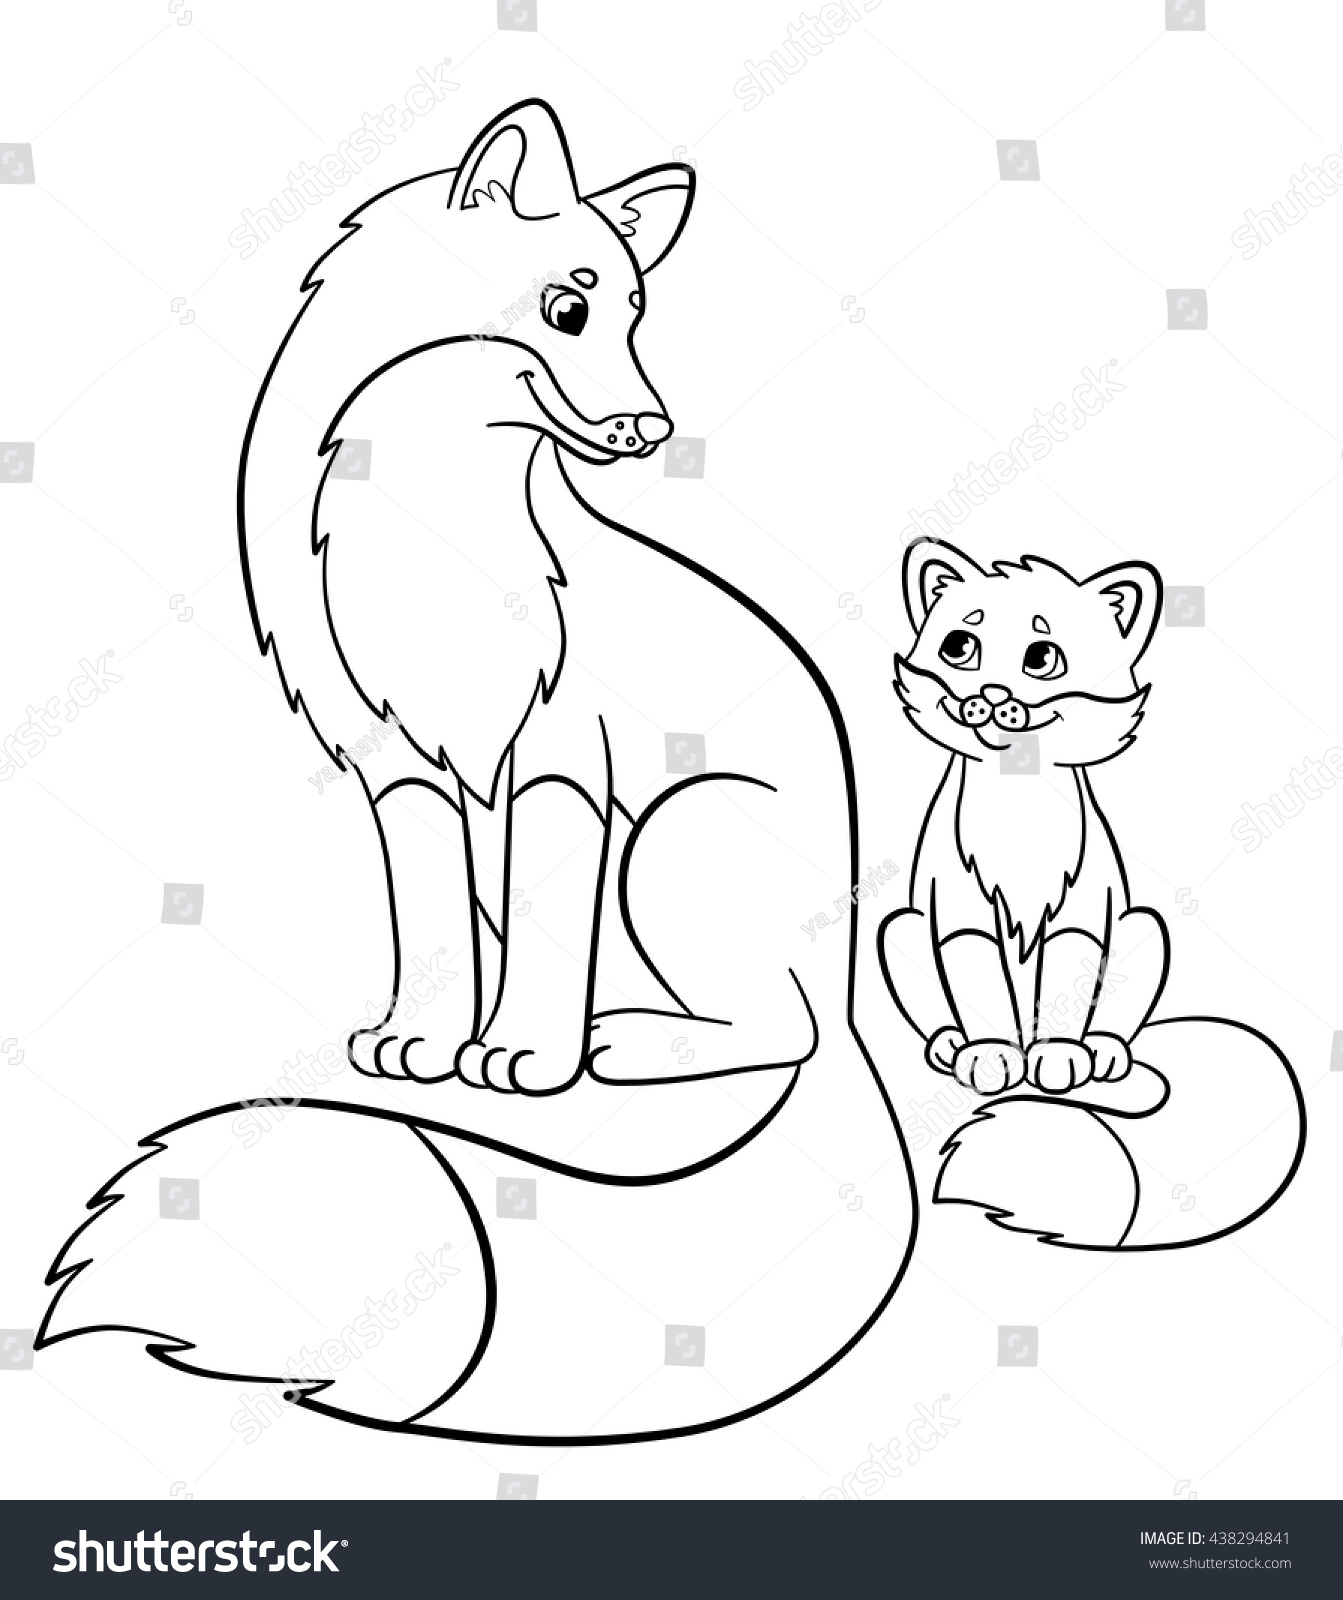 Coloring pages Wild animals Mother fox with her little cute baby fox smile